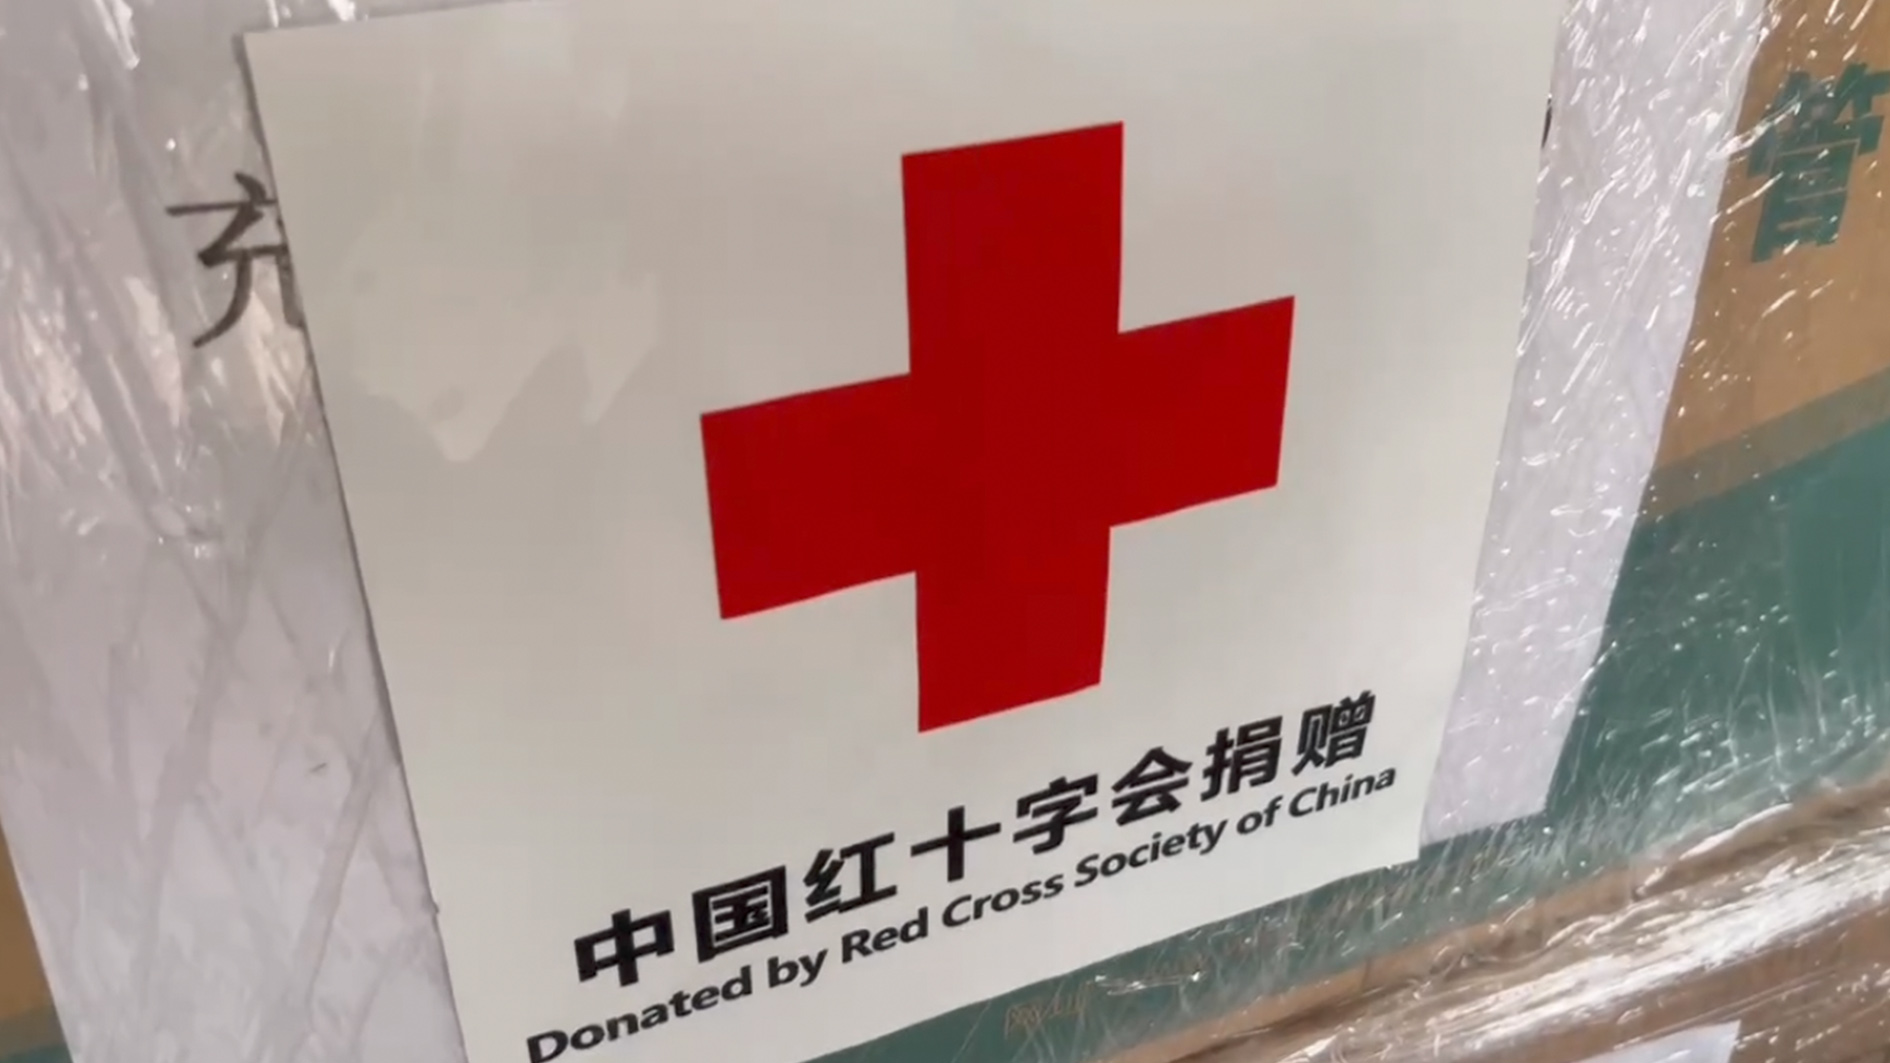 ukuelige flåde Svin Red Cross Society of China sends medical supplies, rescuers to Syria - CGTN